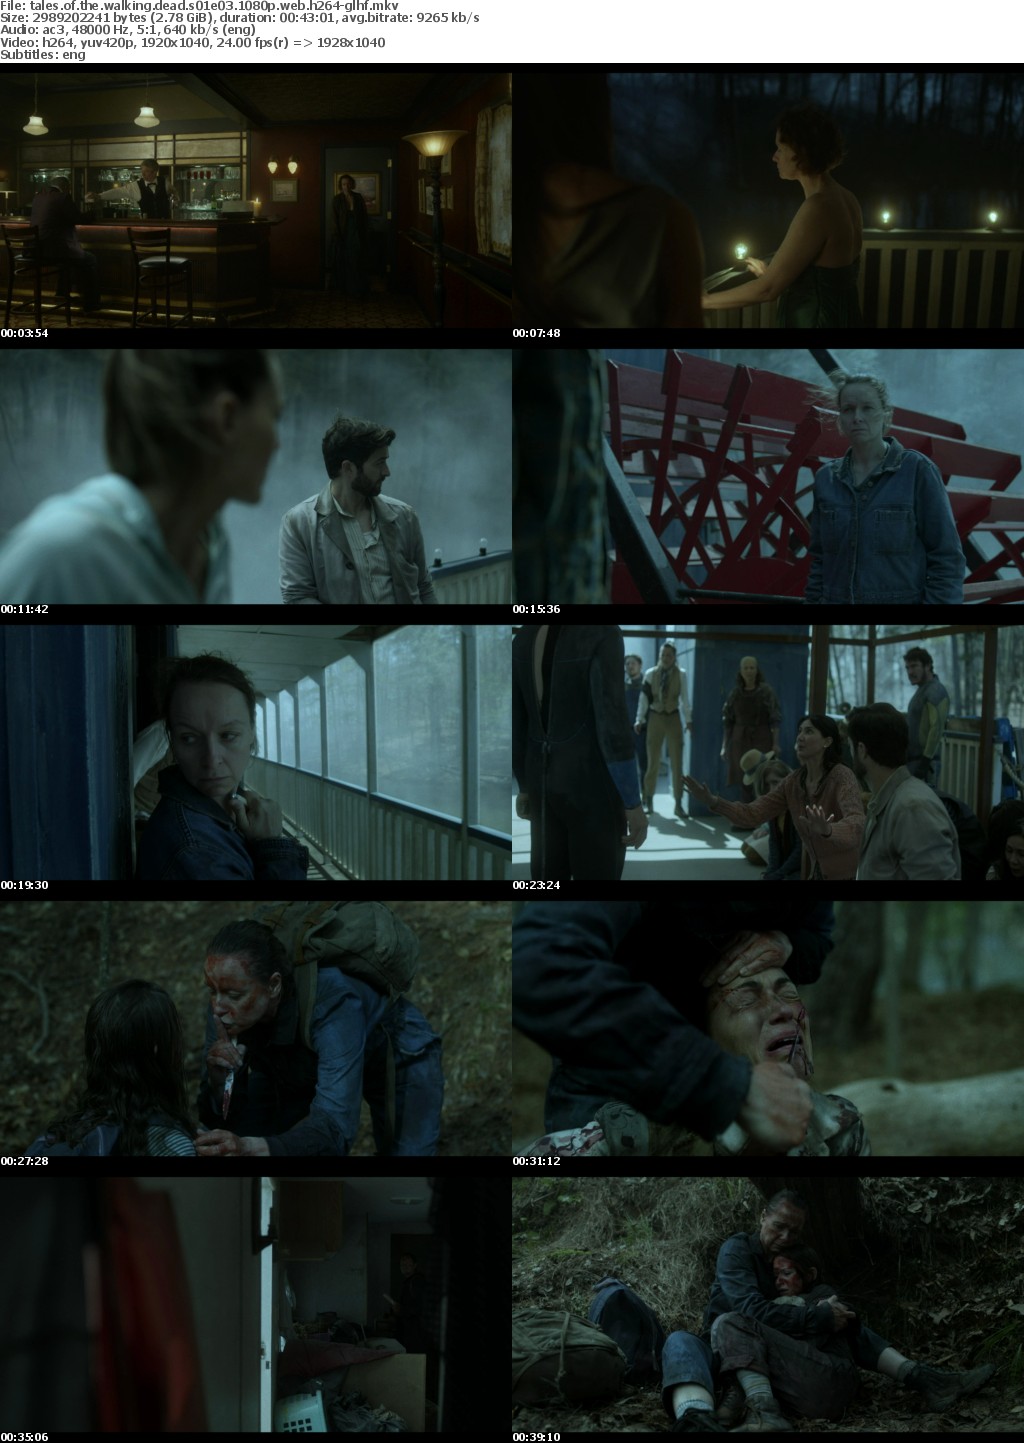 Tales of the Walking Dead S01E03 1080p WEB H264-GLHF